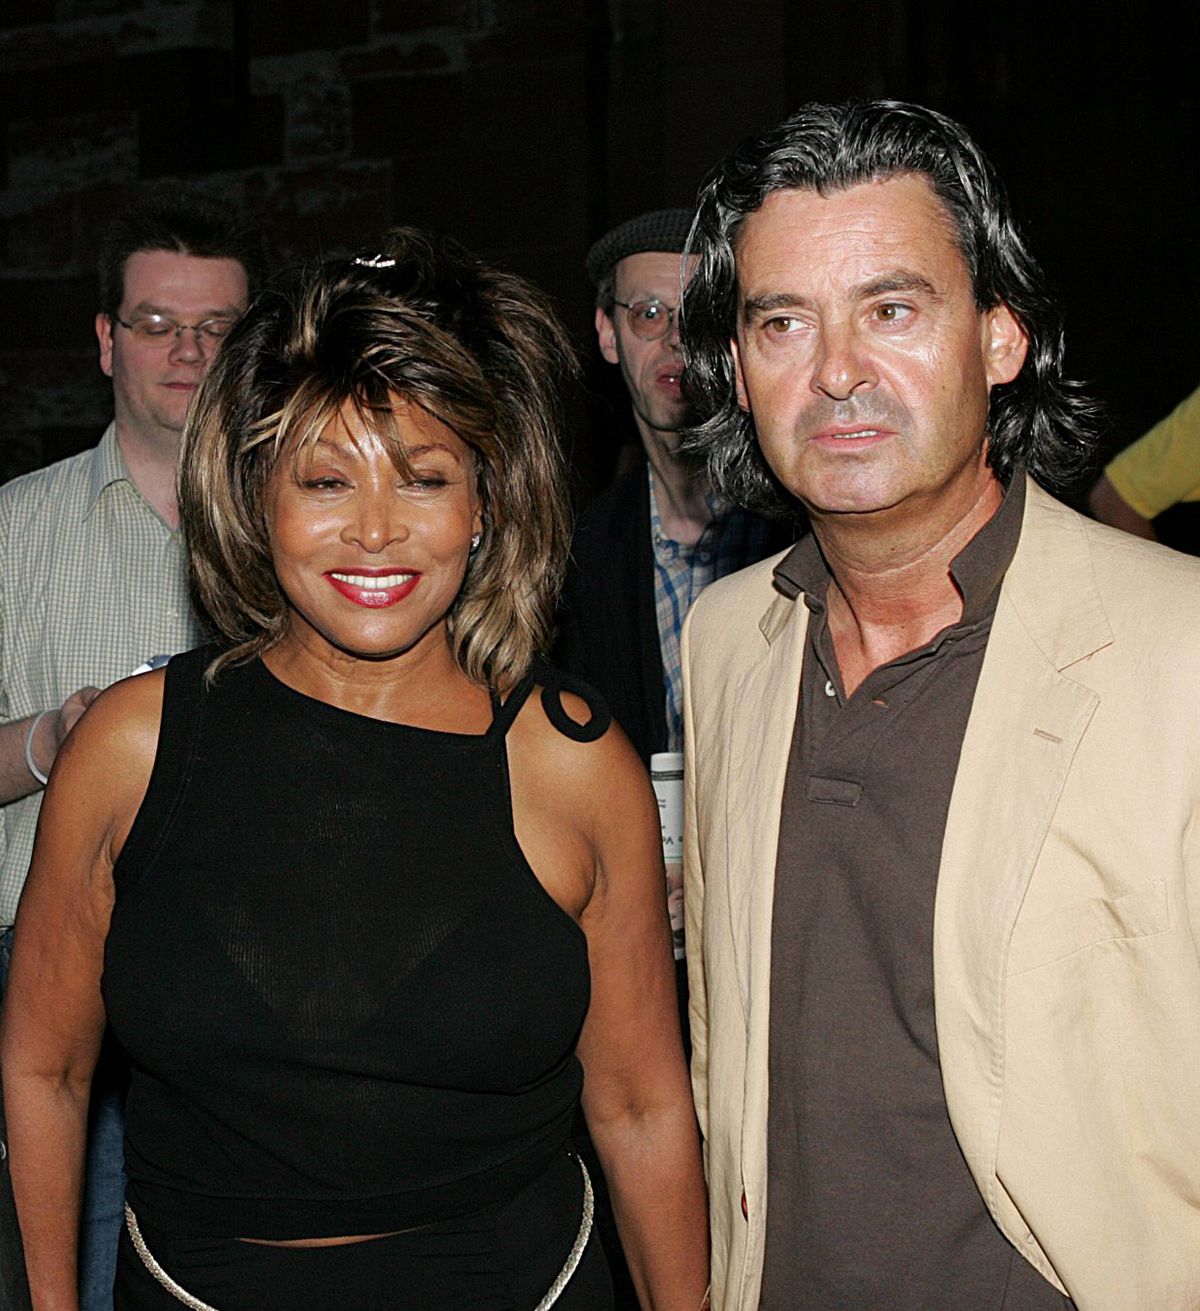 Tina Turner and Erwin Bach pictured in 2005.